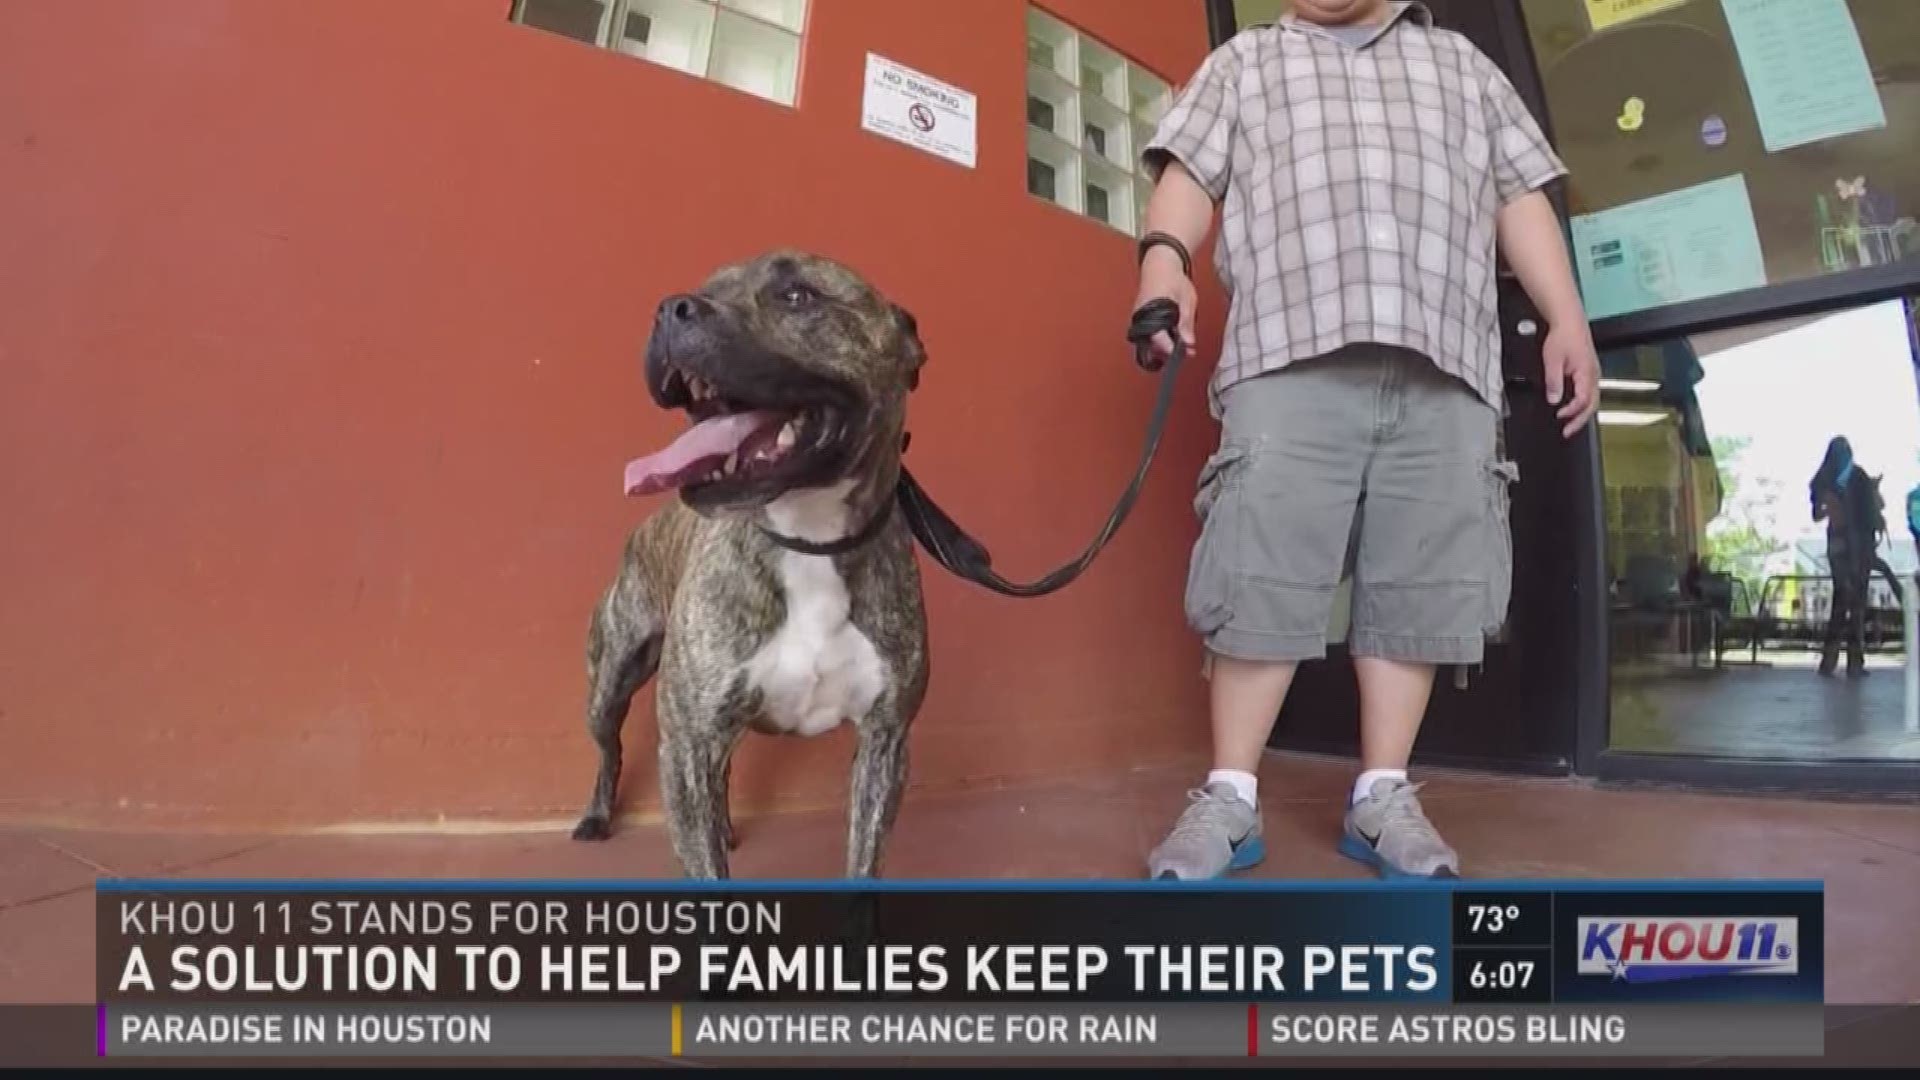 The Harris County Animal Shelter offers alternative options to help keep people and their pets together.